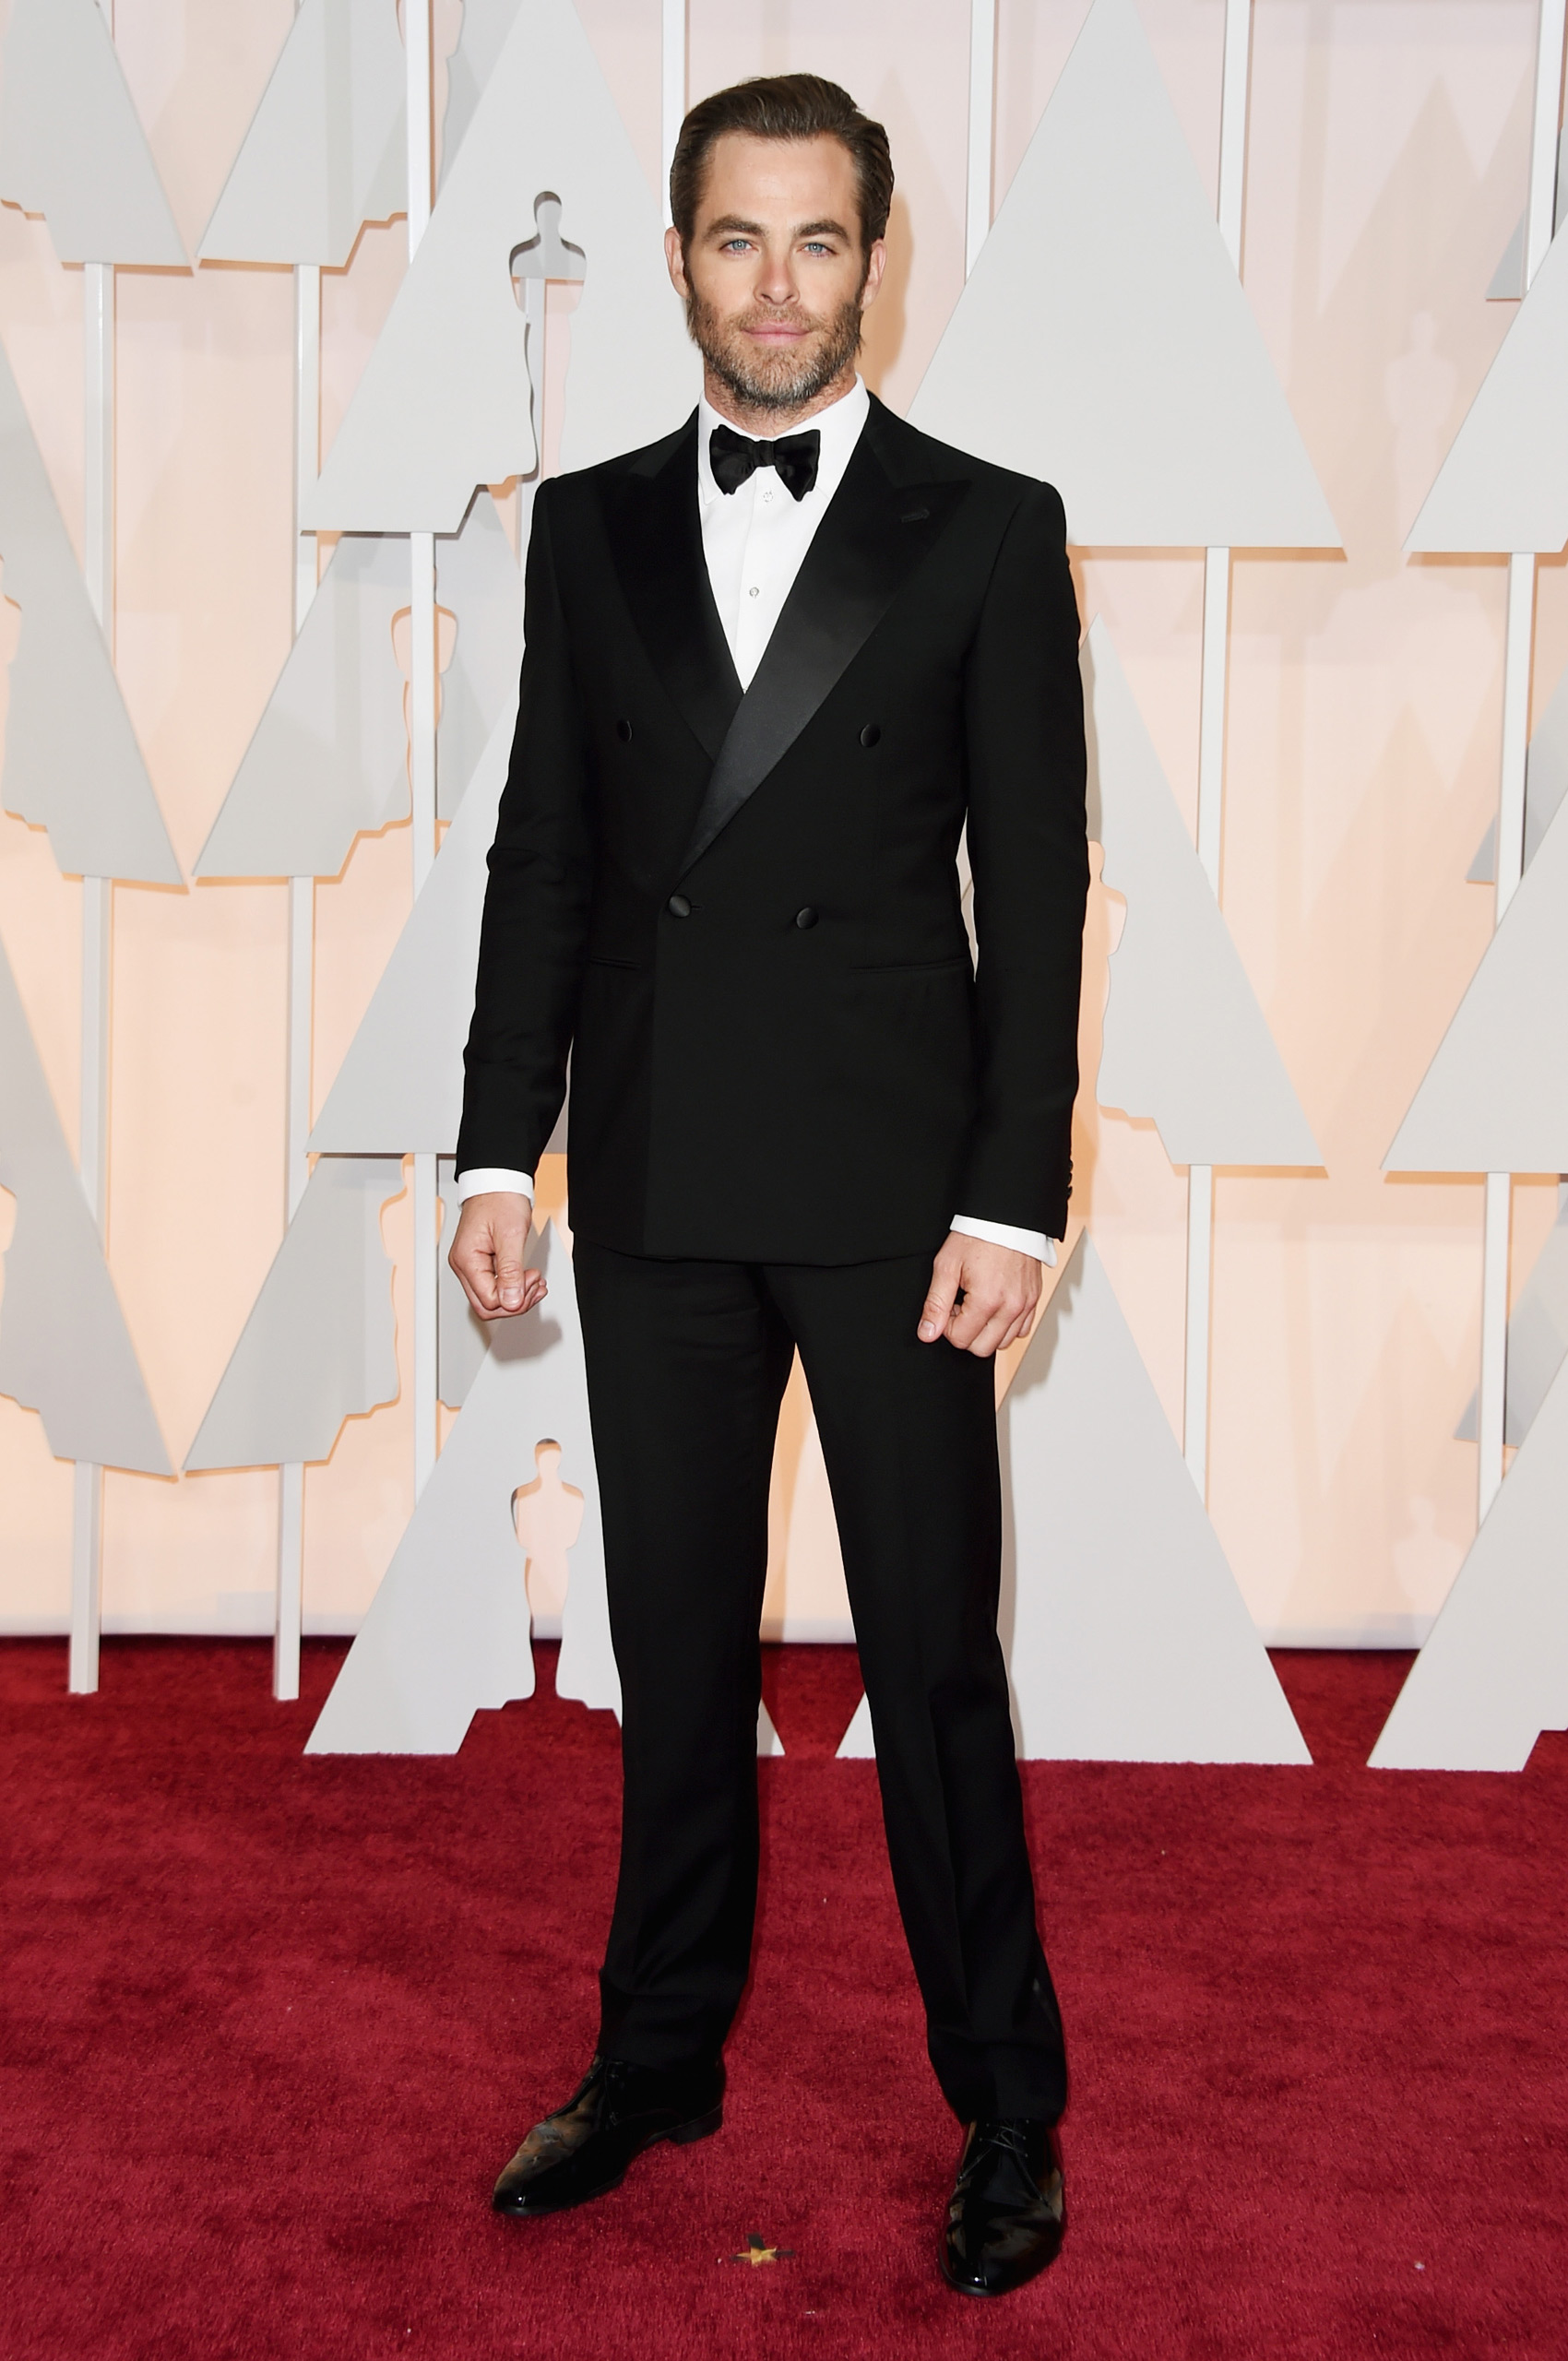 Chris Pine attends the 87th Annual Academy Awards on Feb. 22, 2015 in Hollywood, Calif.